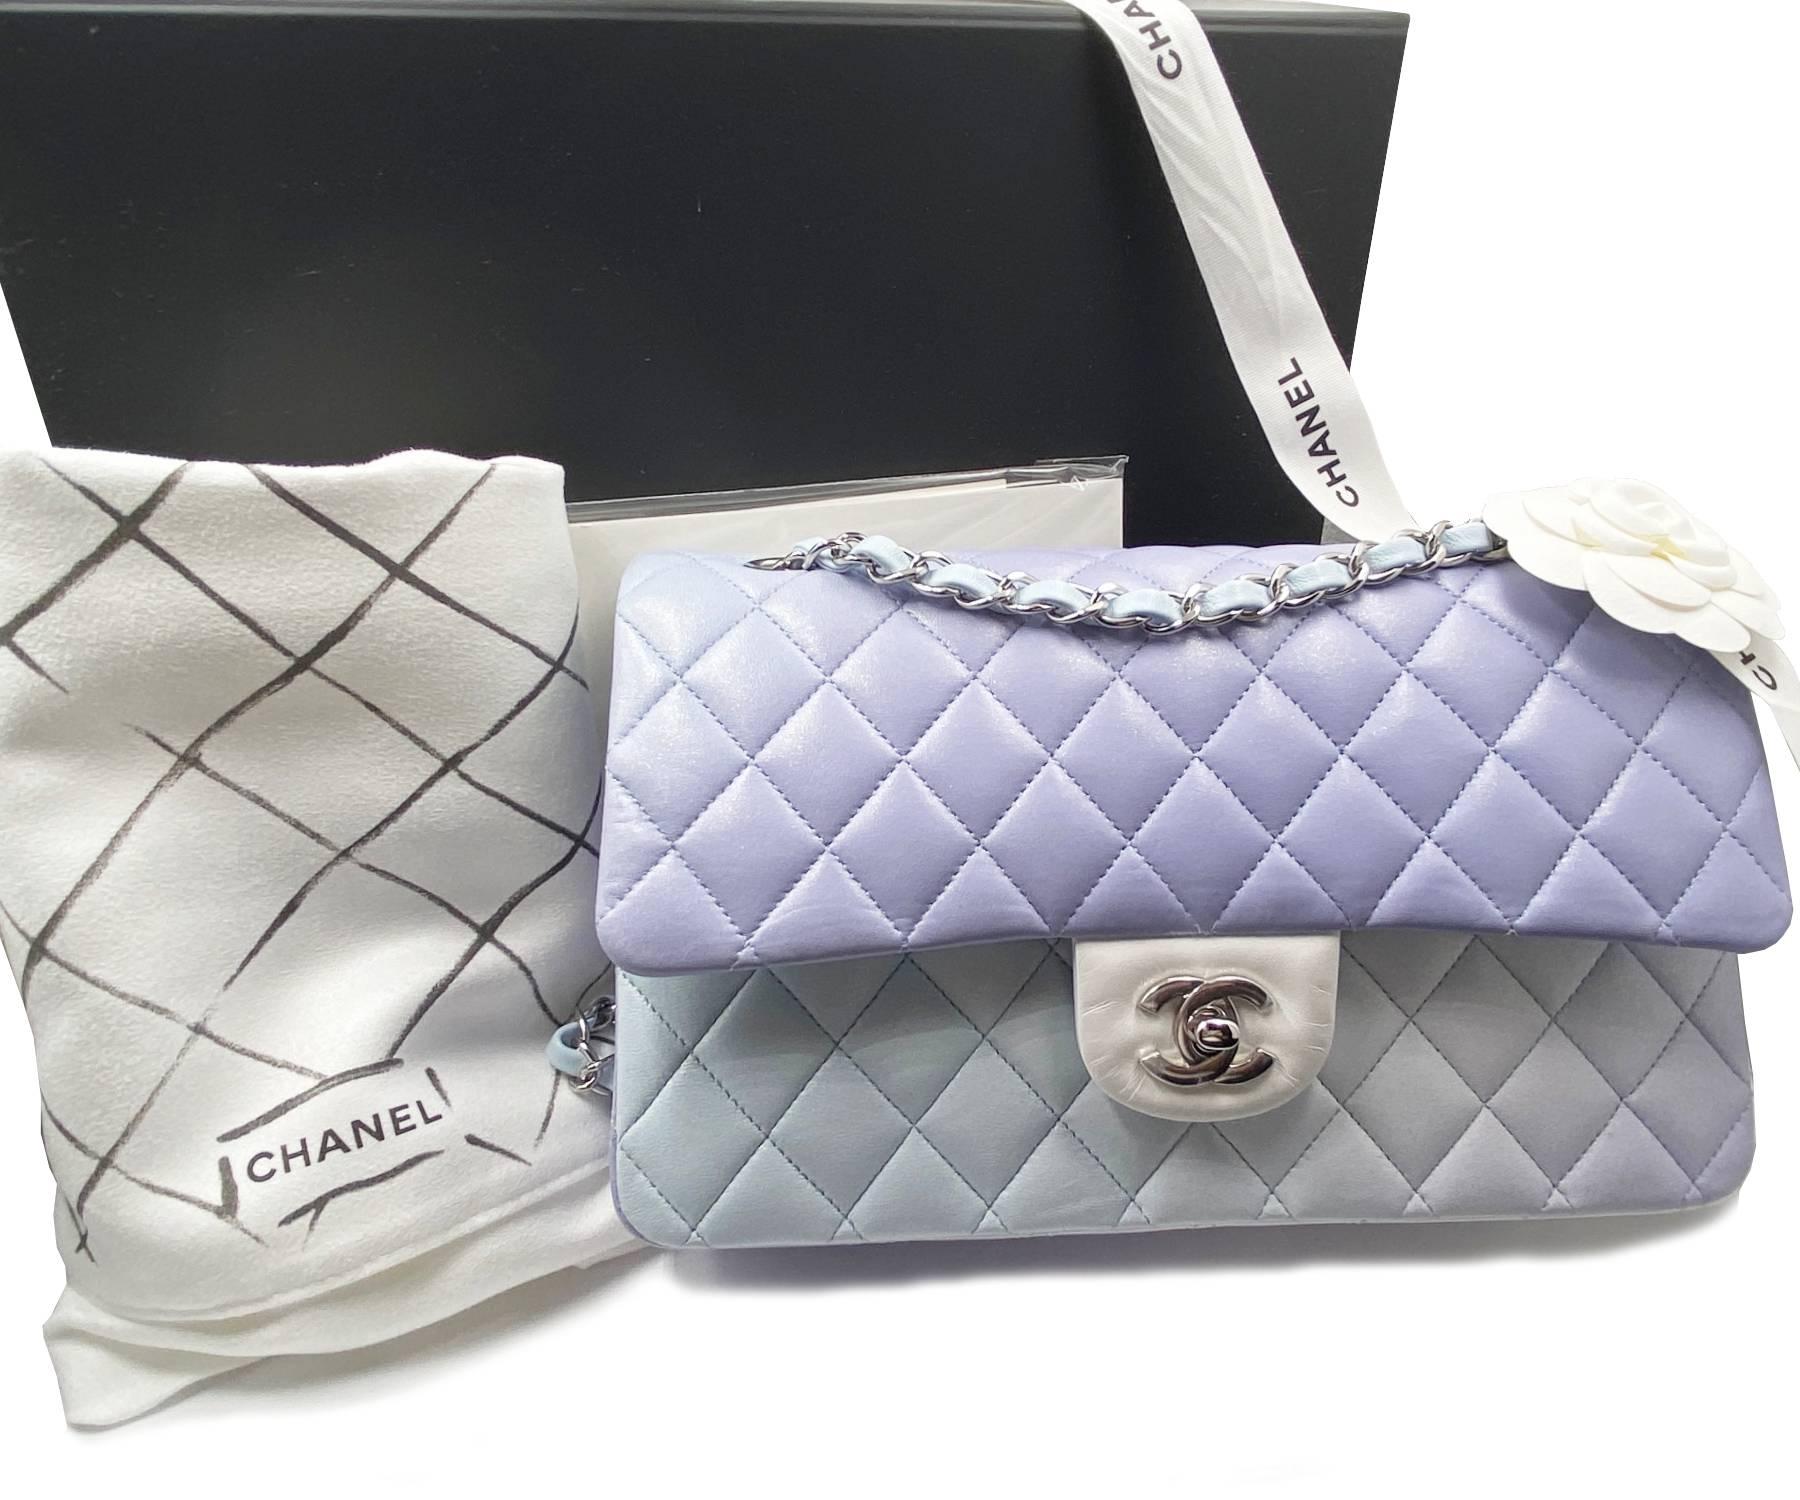 Chanel Brand New Classic Rare 10 Medium Lavender Blue Ombre Degrade Bag

*XXXXXXXX
* Made in France
*Comes with serial sticker bar, receipt, booklet, dustbag, box, camellia flower and ribbon
*Silver Hardware

-Approximately 10″ x 5.5″ x 2.5″
-Strap-